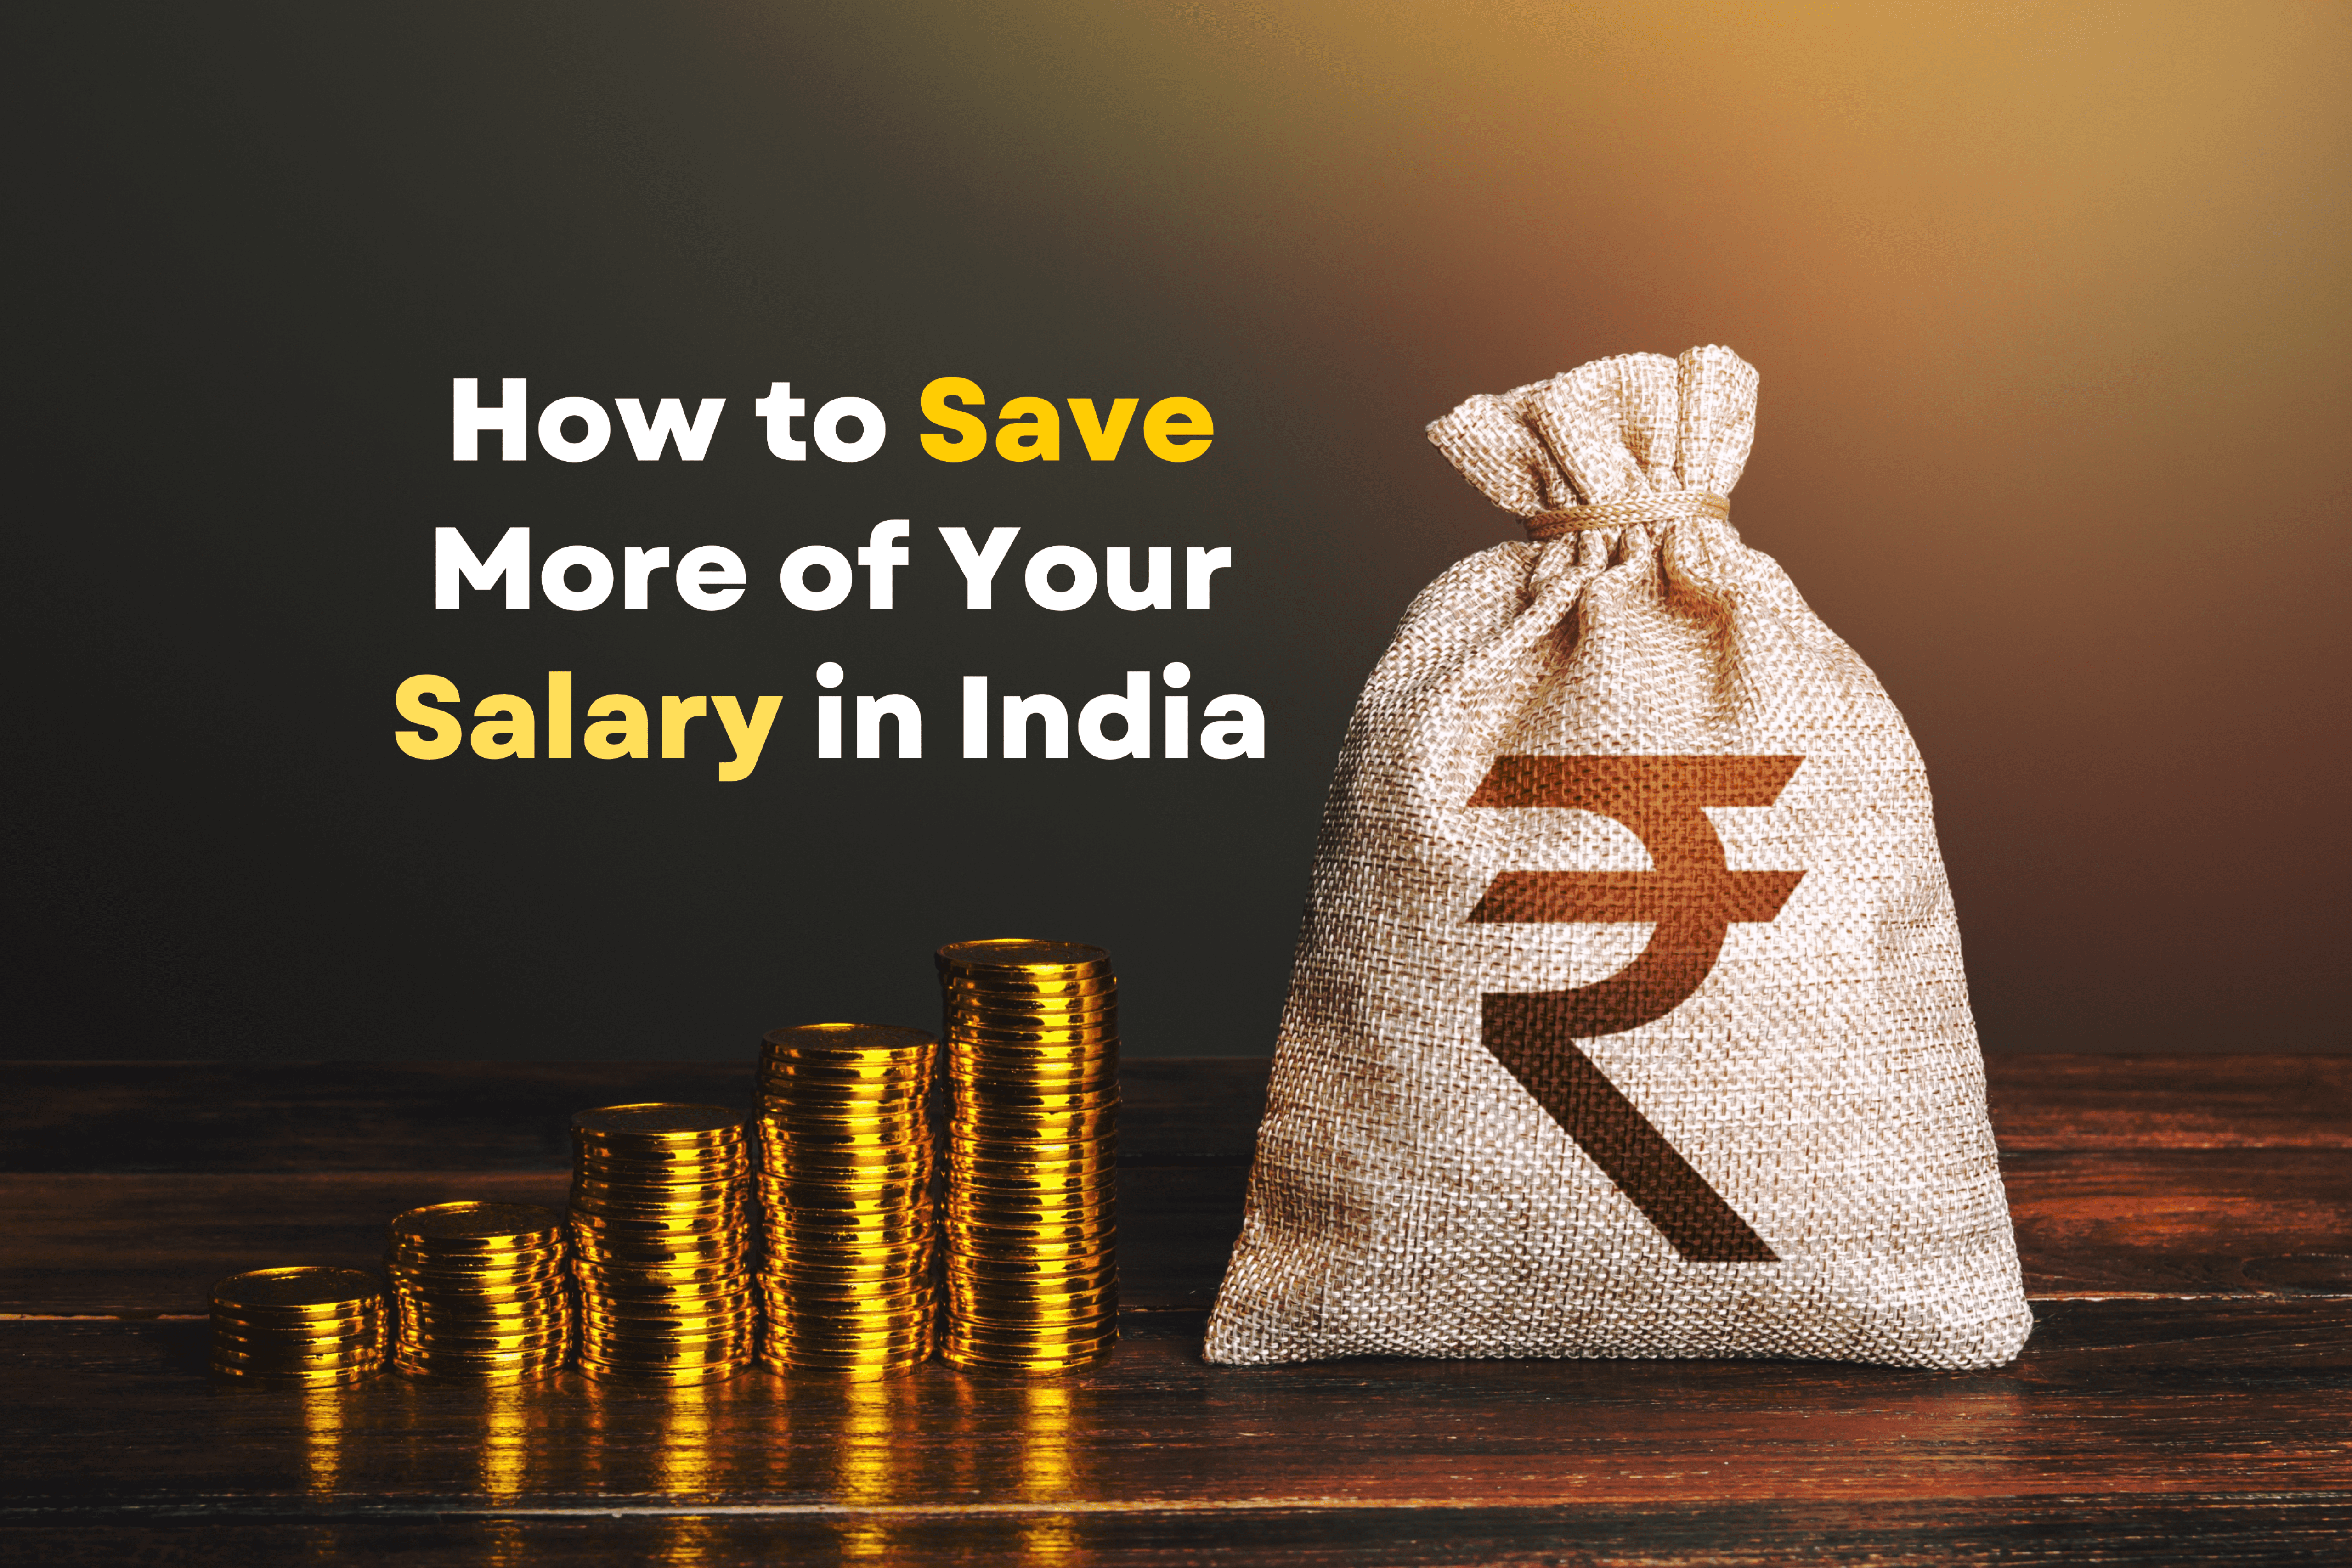 Mastering Your Finances: How to Save More of Your Salary in India